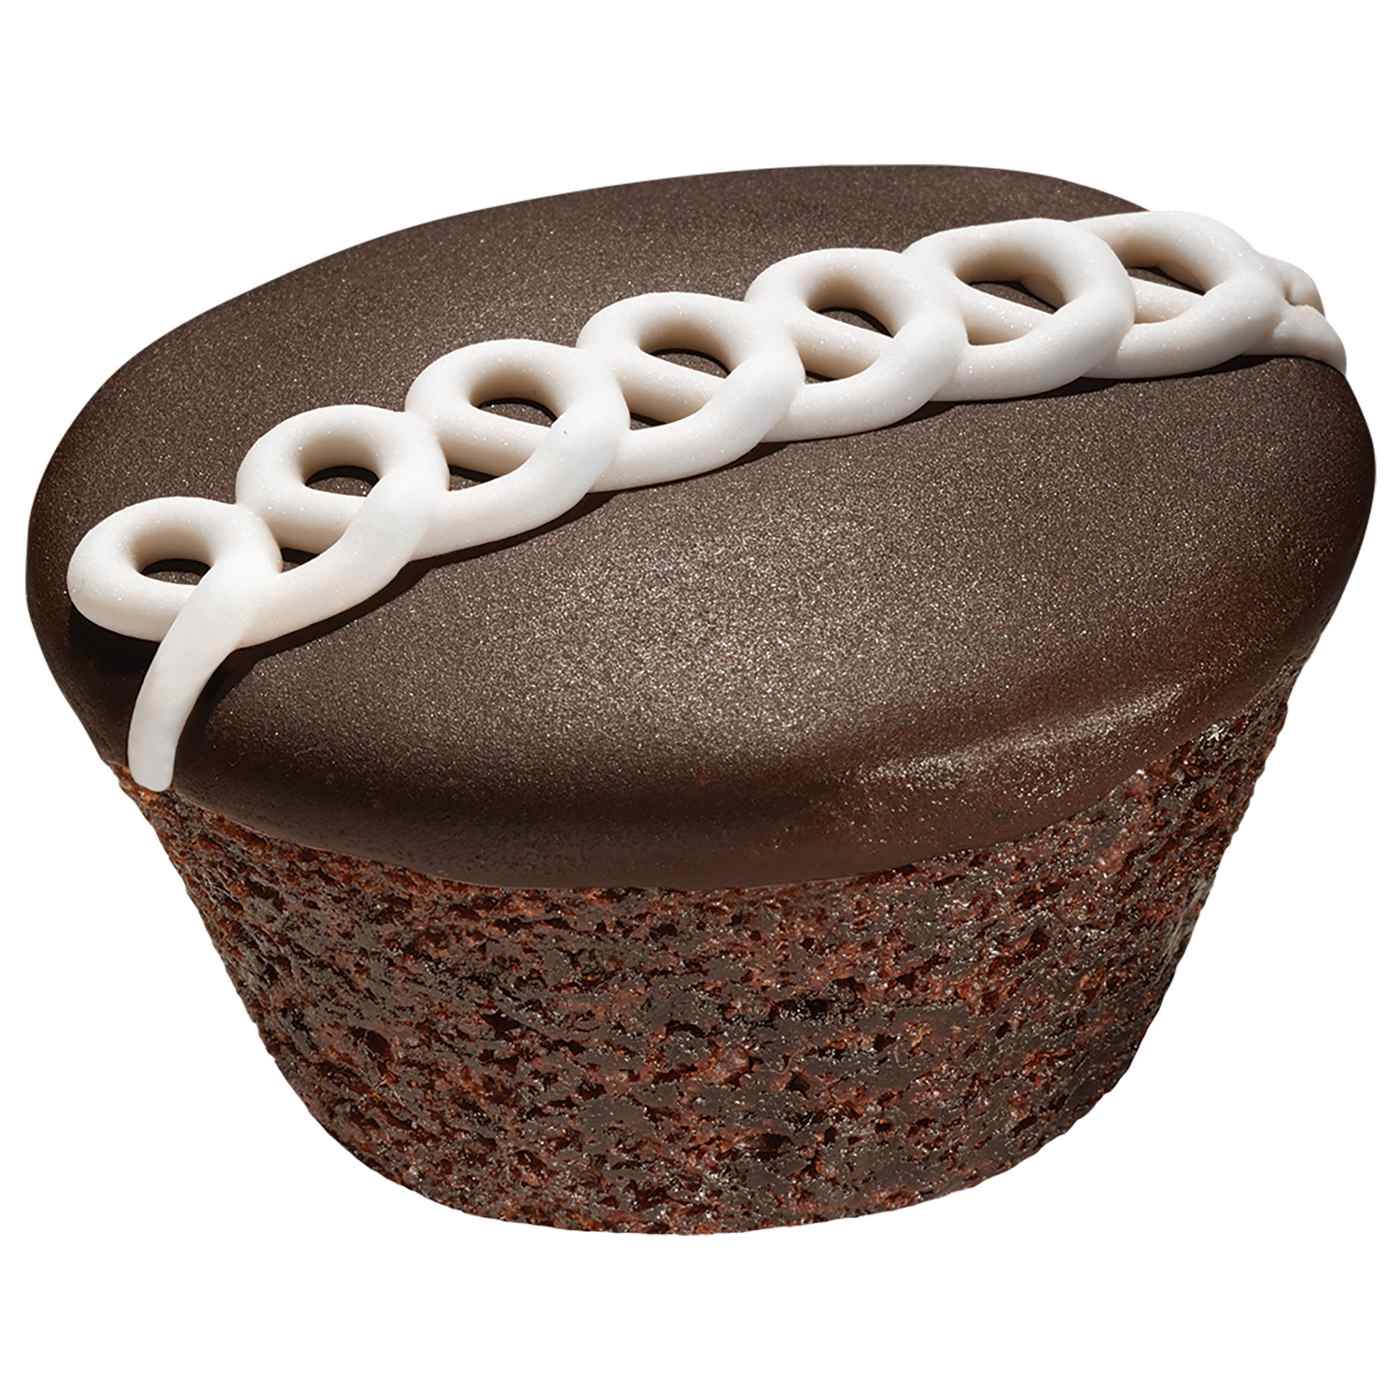 Hostess Chocolate Cupcakes - Family Pack; image 4 of 4